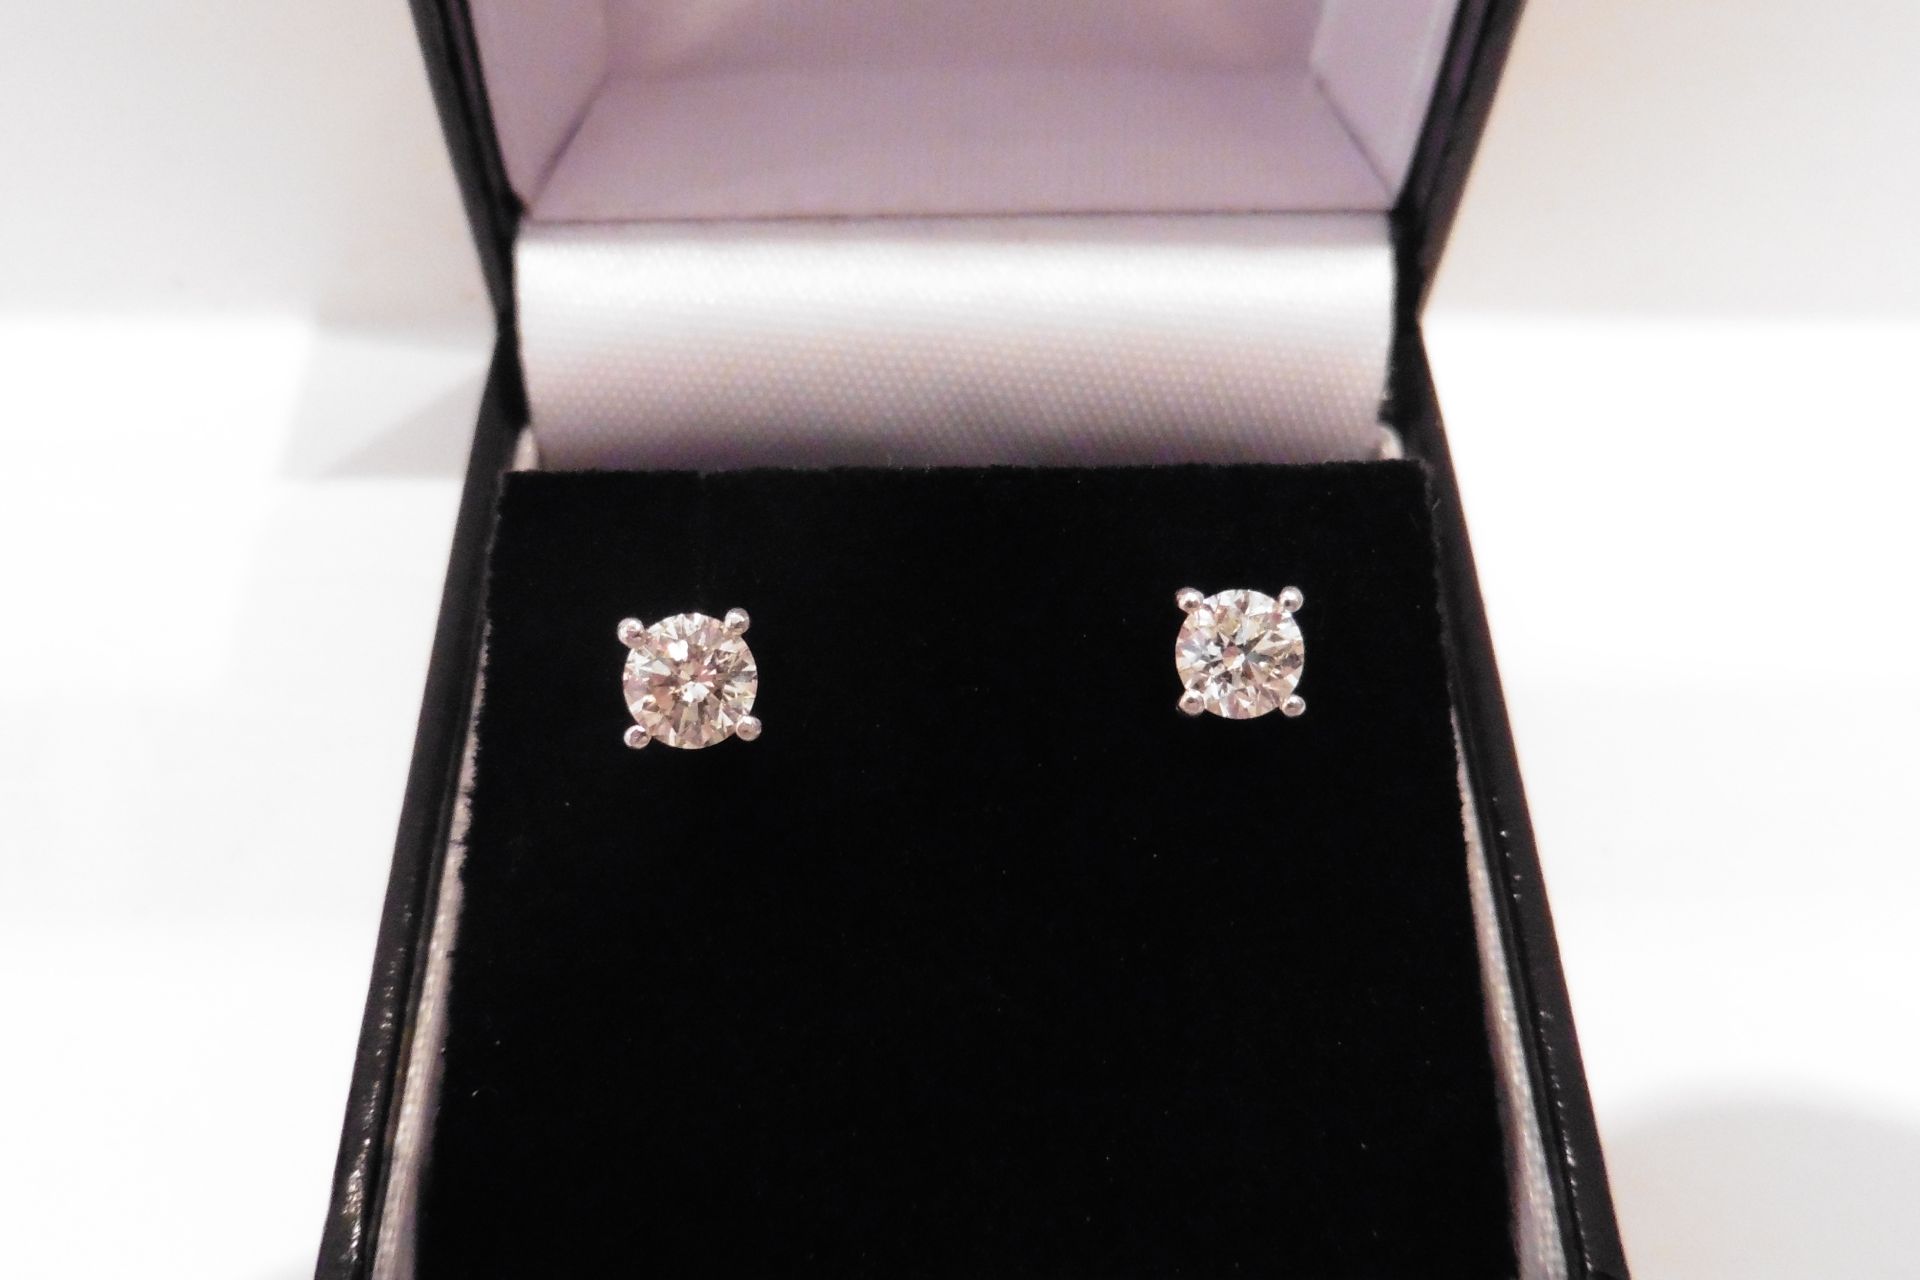 Elegant pair of solitaire stud earrings each set with a russian cut diamond weighing a total of 0.40